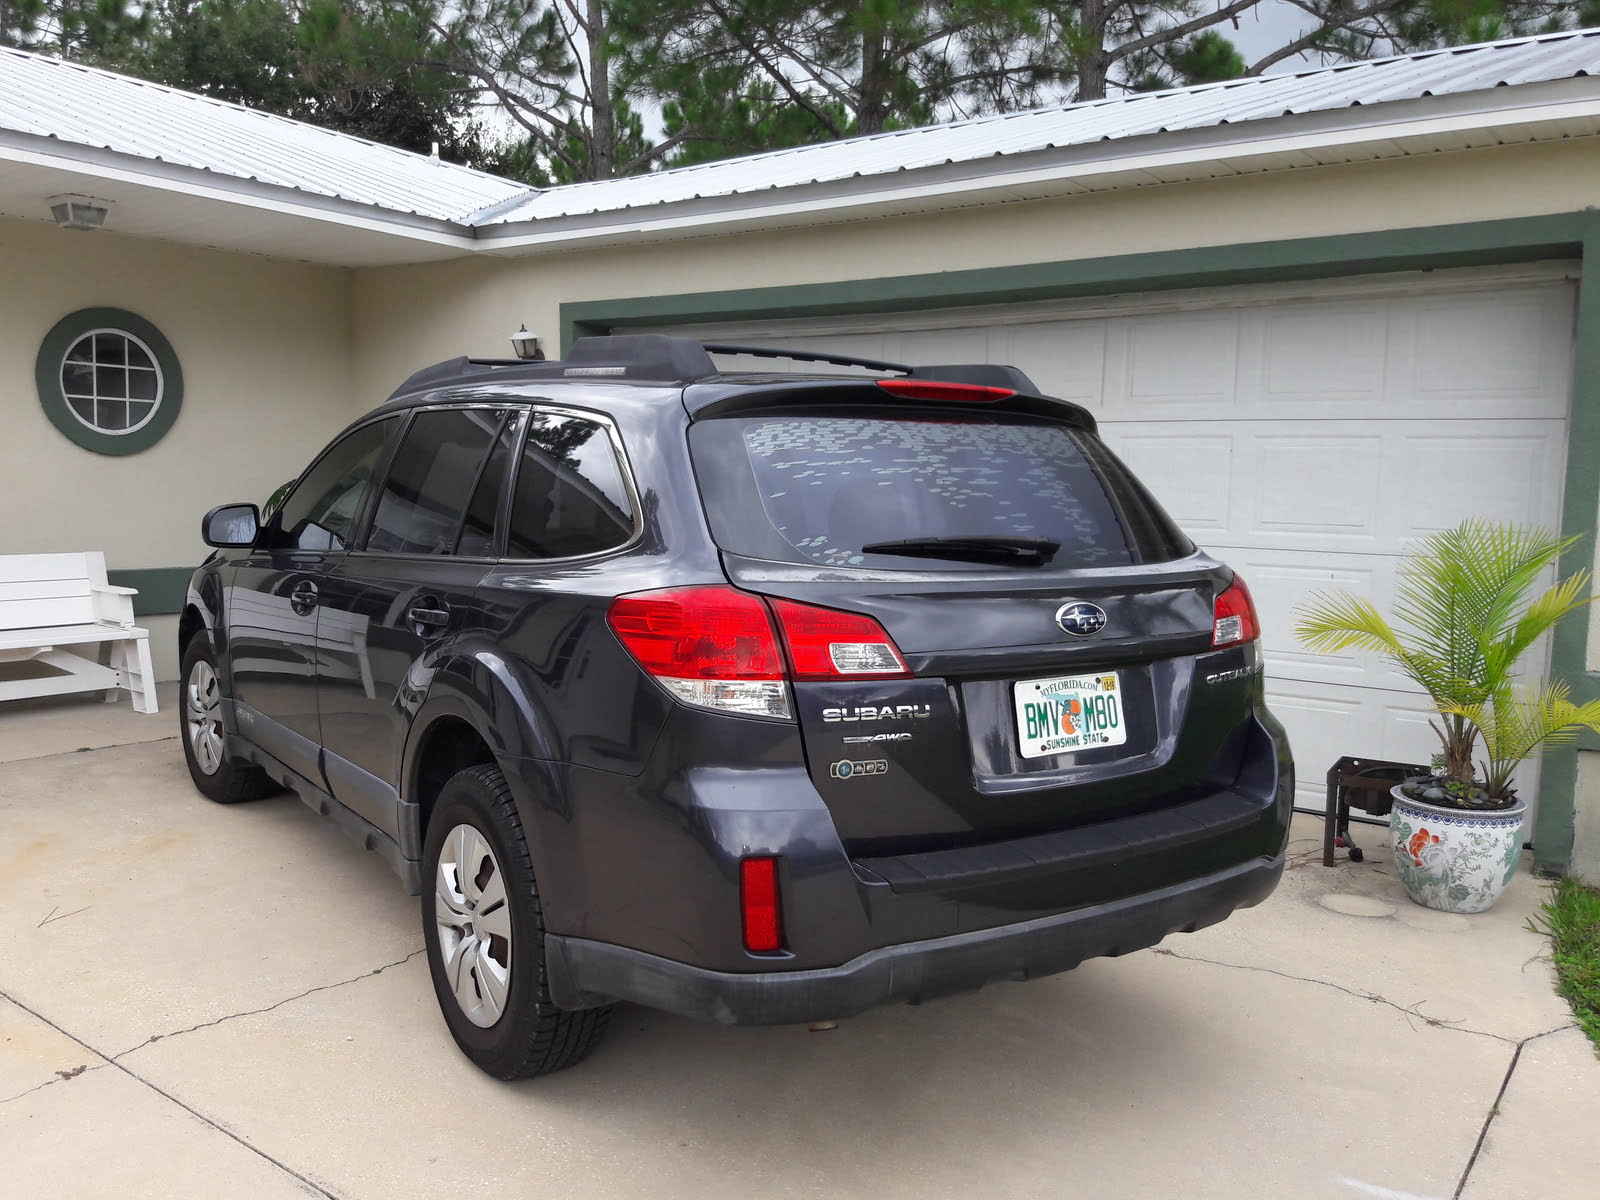 Subaru Outback Questions - Towing a 16ft with trailer 2011 2.5 outback - CarGurus 2011 Subaru Outback 2.5 I Premium Towing Capacity